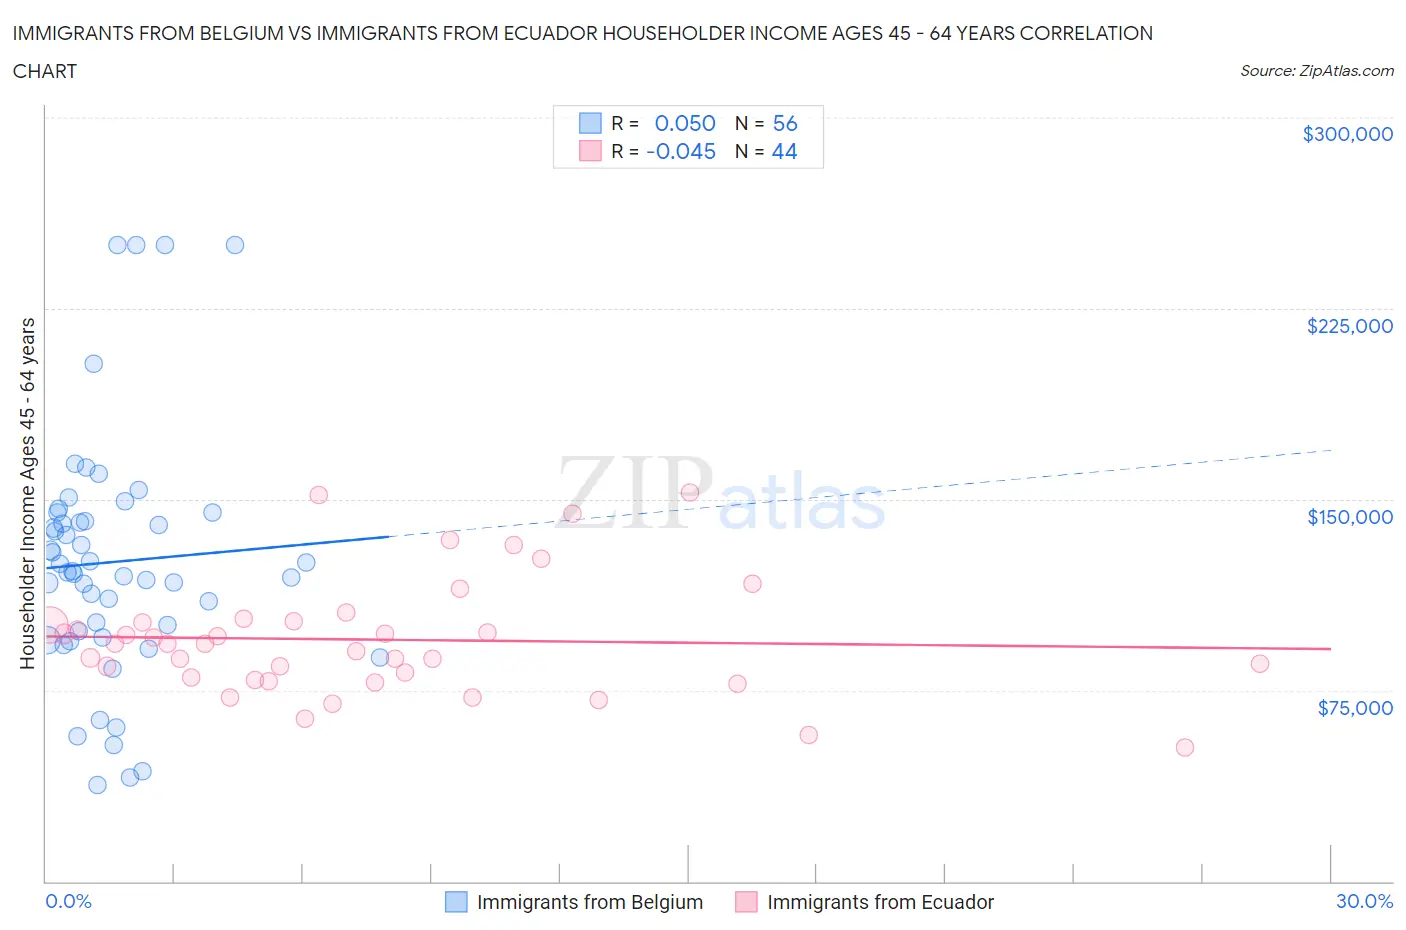 Immigrants from Belgium vs Immigrants from Ecuador Householder Income Ages 45 - 64 years